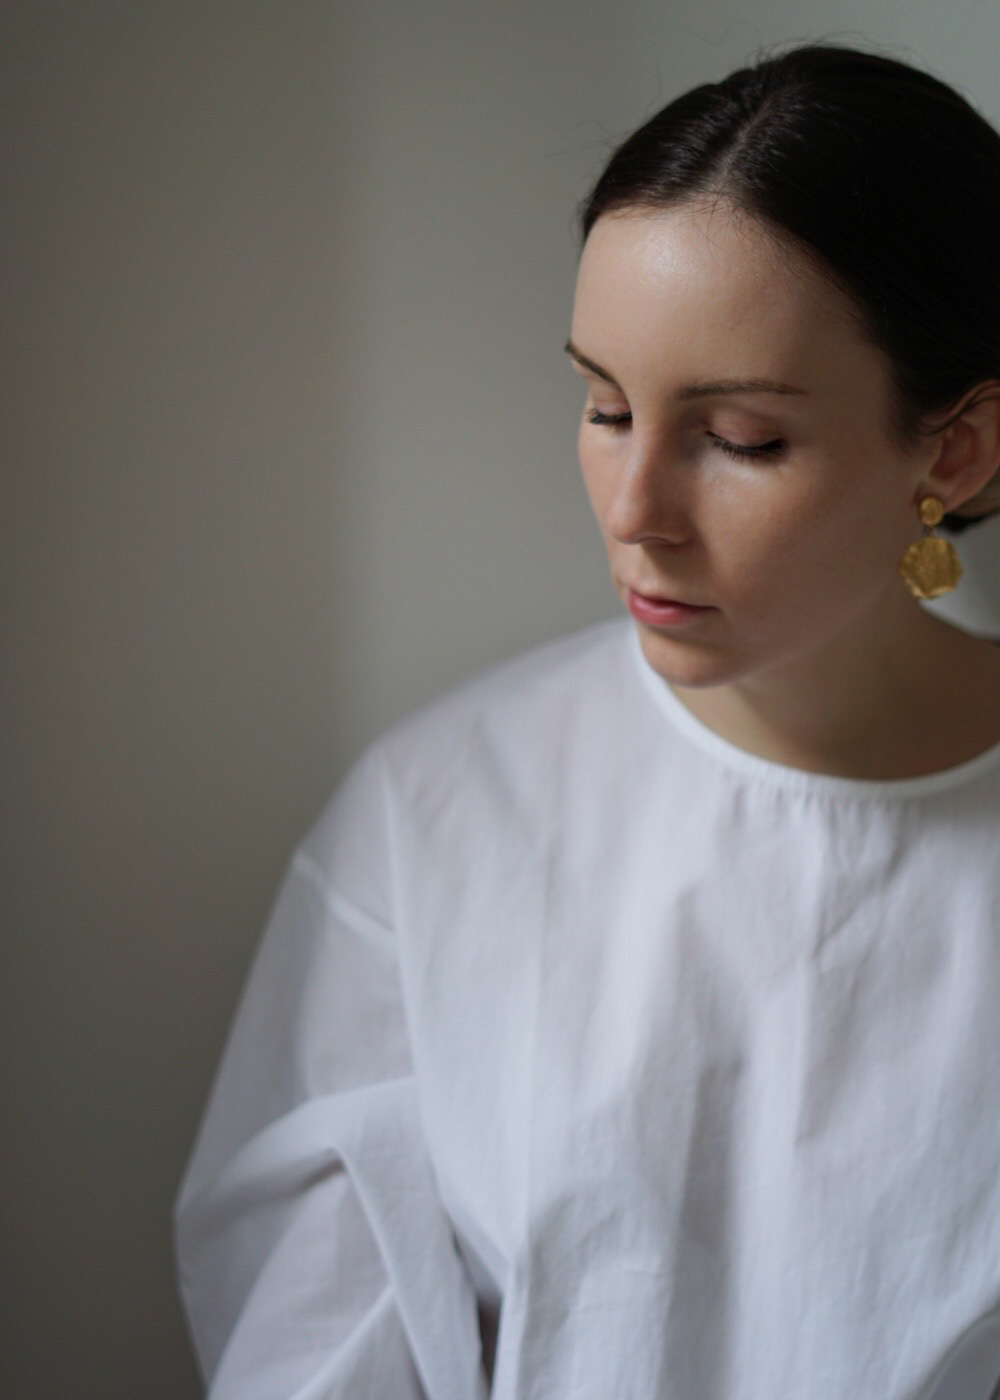 Handcrafted Gold Jewelry, Earrings Maria Sørensen, Danish Design | Fashion Style Timeless Aesthetic, Statement Golden Jewelry | RG Daily Blog